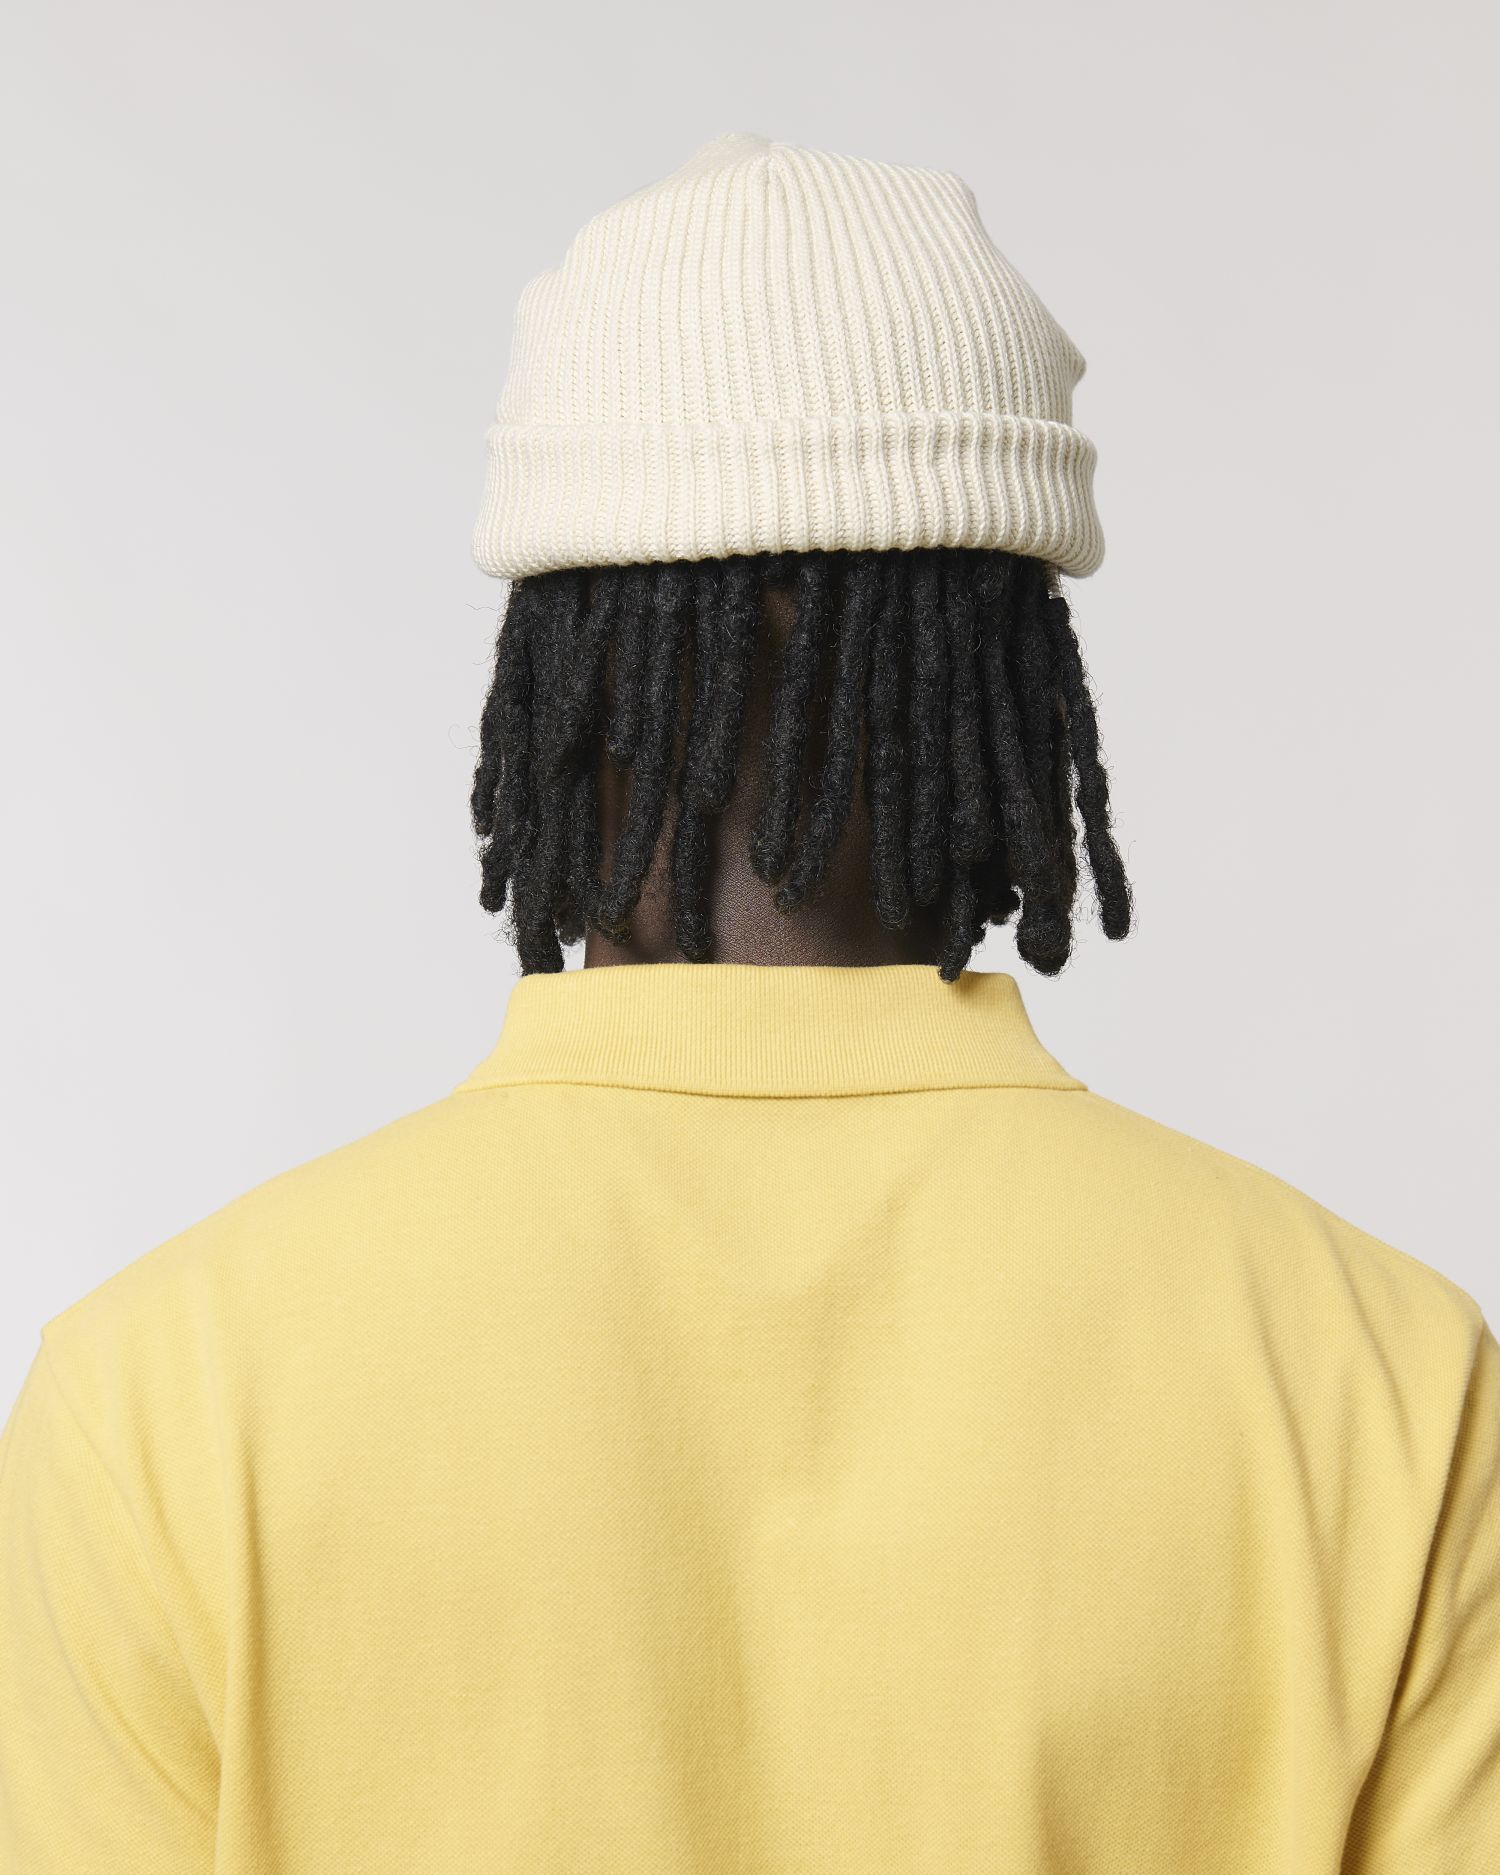  Fisherman Beanie in Farbe Natural